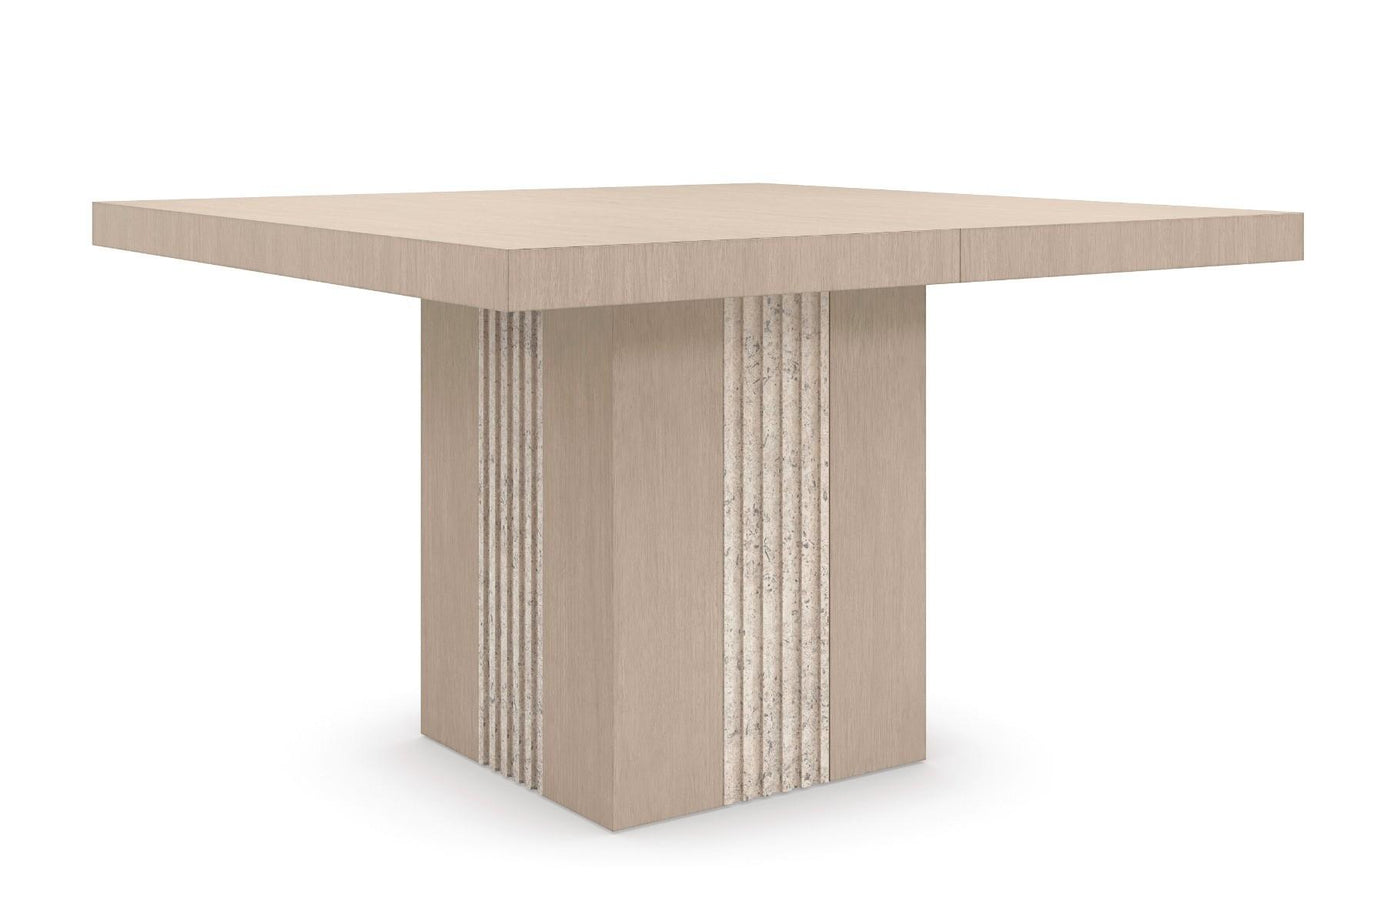 Caracole Unity Light Extending Dining Table